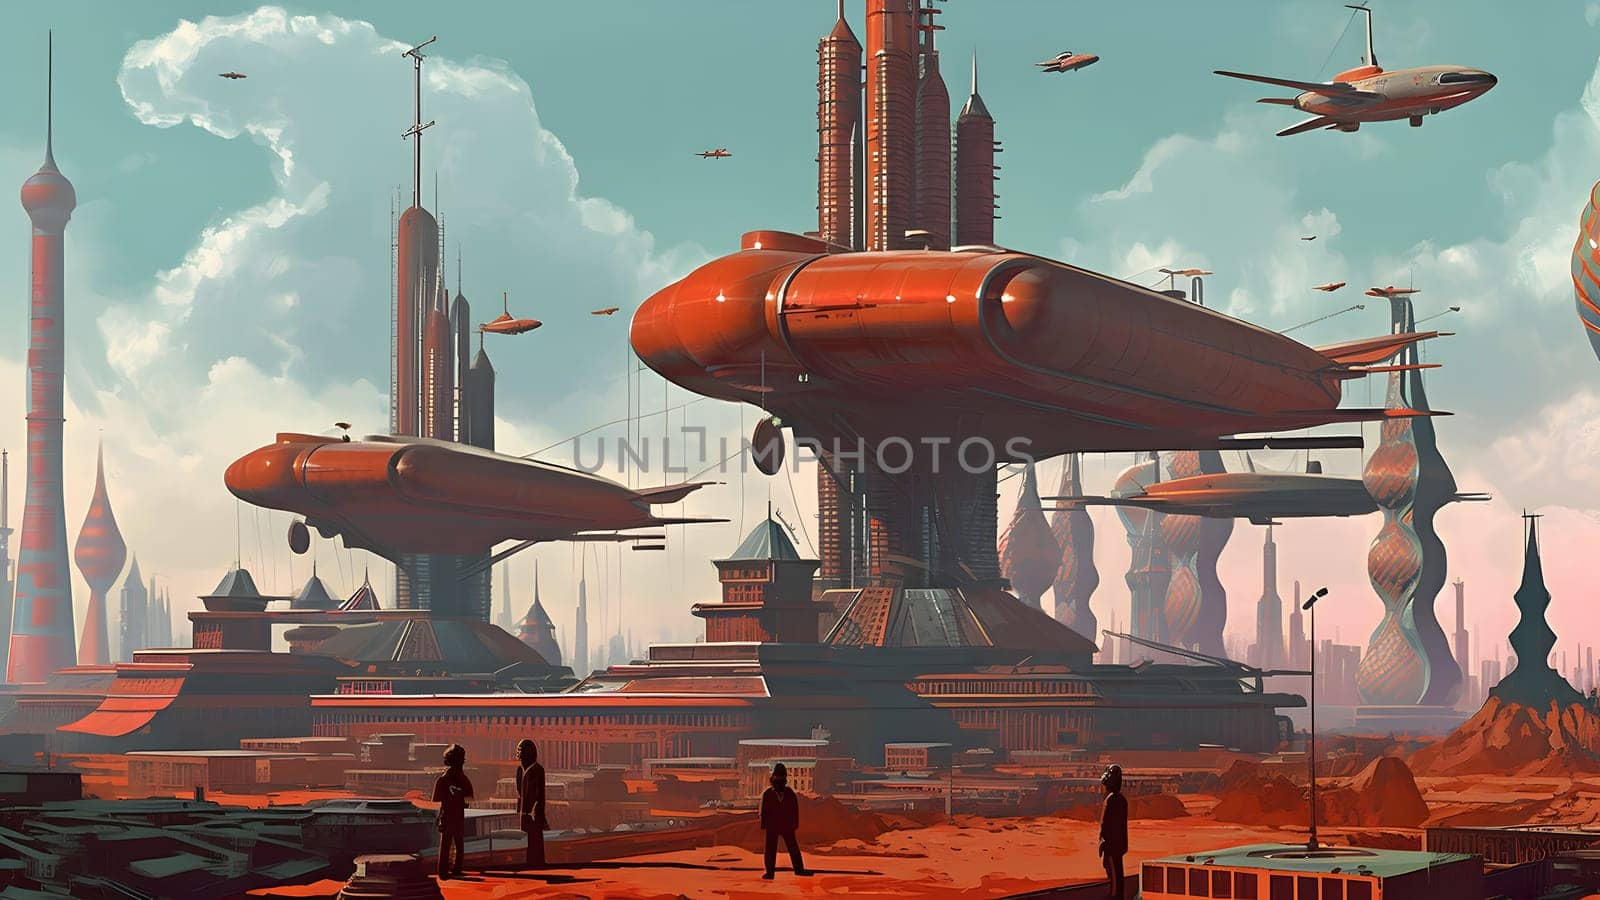 soviet sci-fi futuristic spacecraft art. Neural network generated in May 2023. Not based on any actual person, scene or pattern.